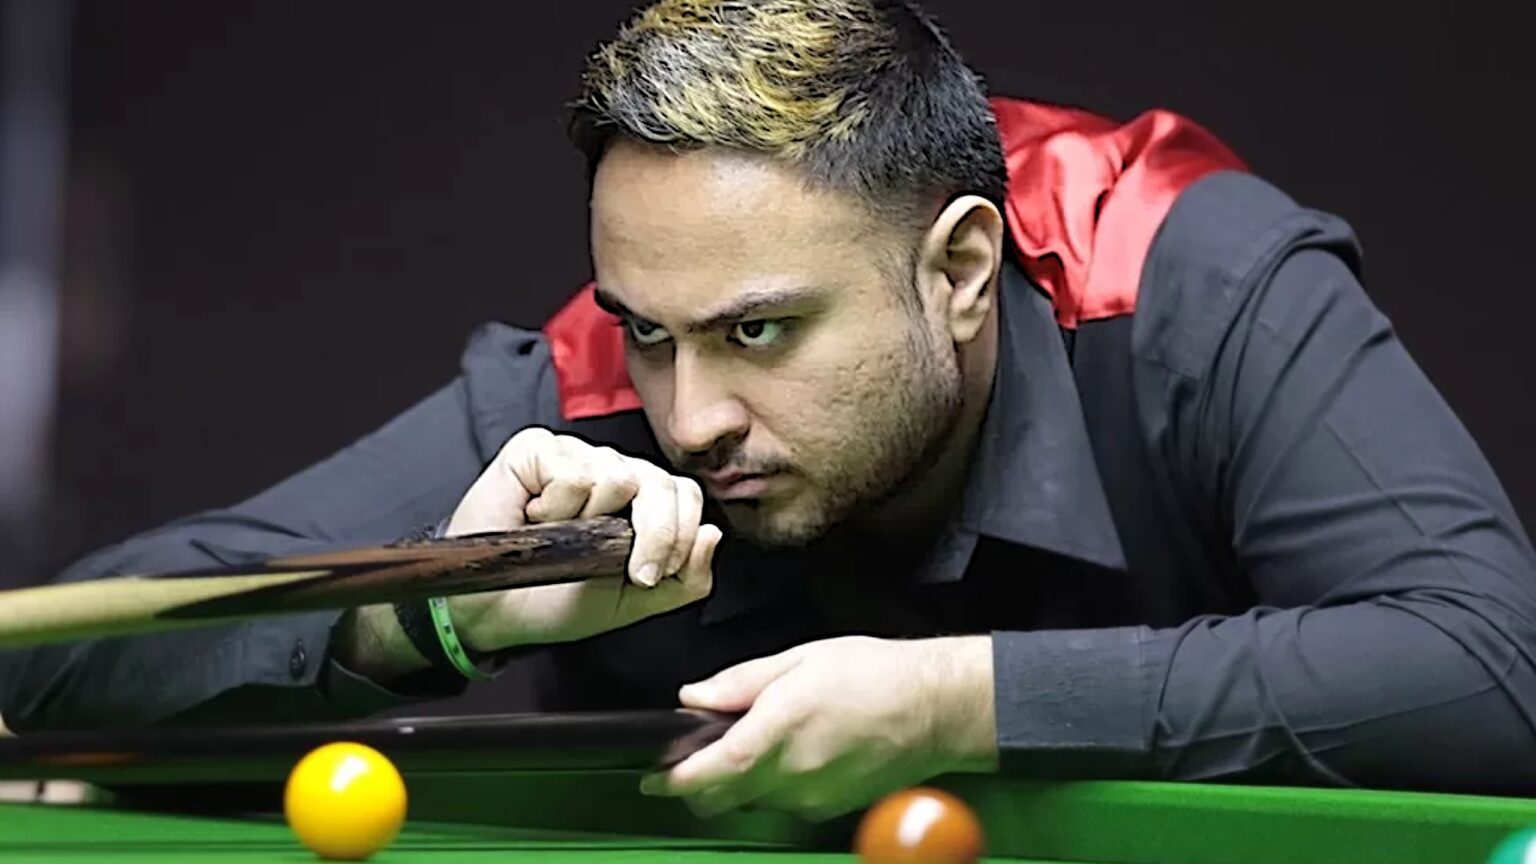 Former Esports Player Swaps Joypad for Snooker Cue